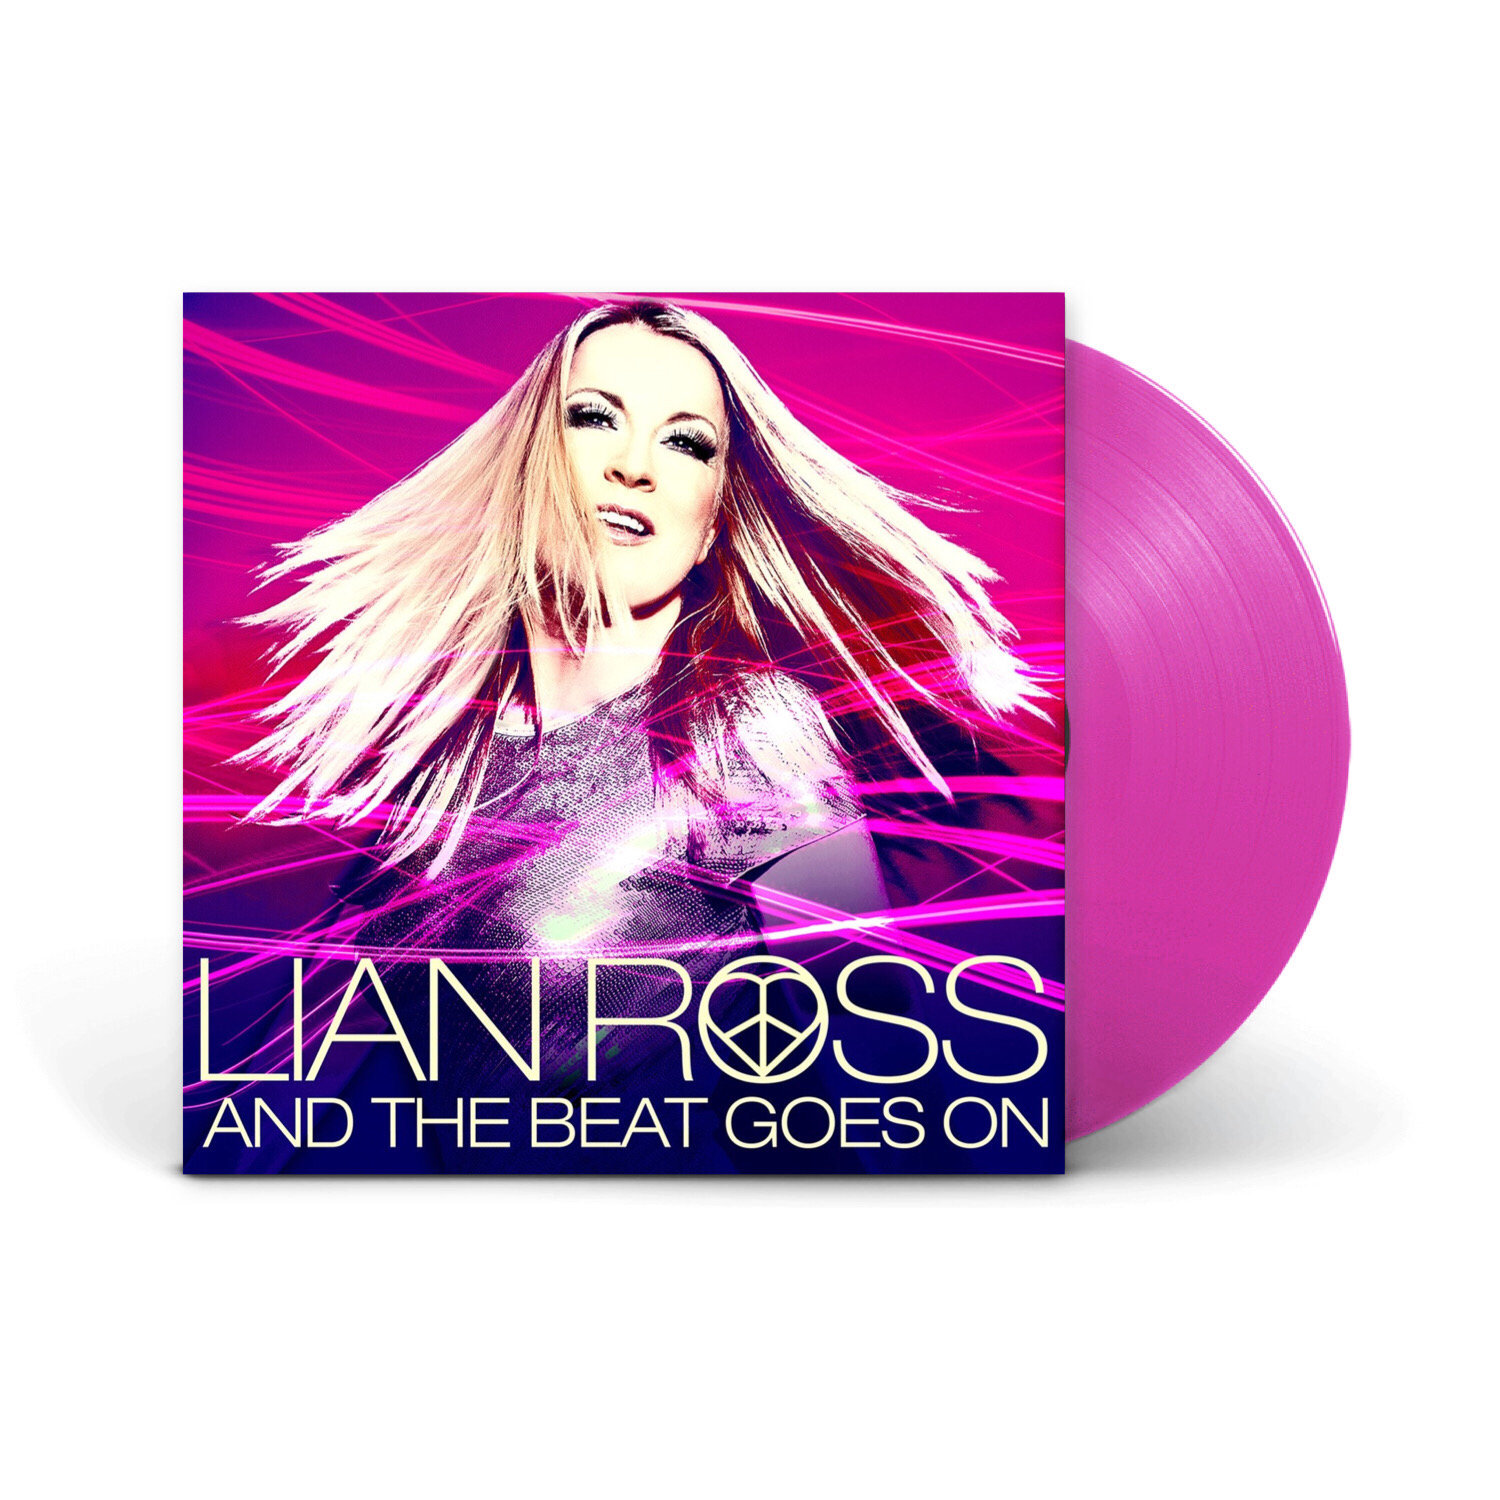 Виниловая пластинка LP: Lian Ross — «And The Beat Goes On» (2016/2021) [Limited Translucent Pink]